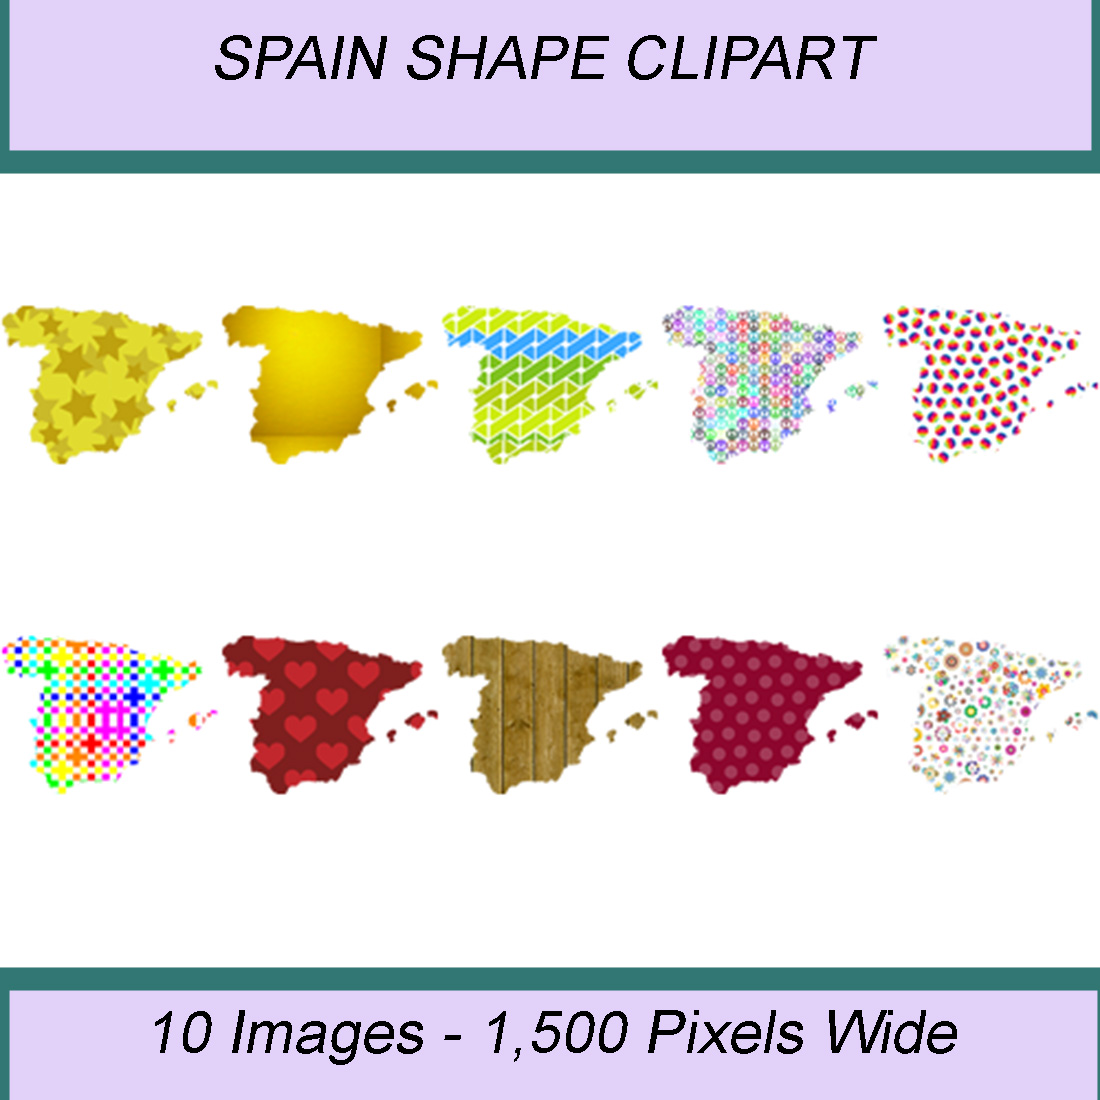 SPAIN SHAPE CLIPART ICONS cover image.